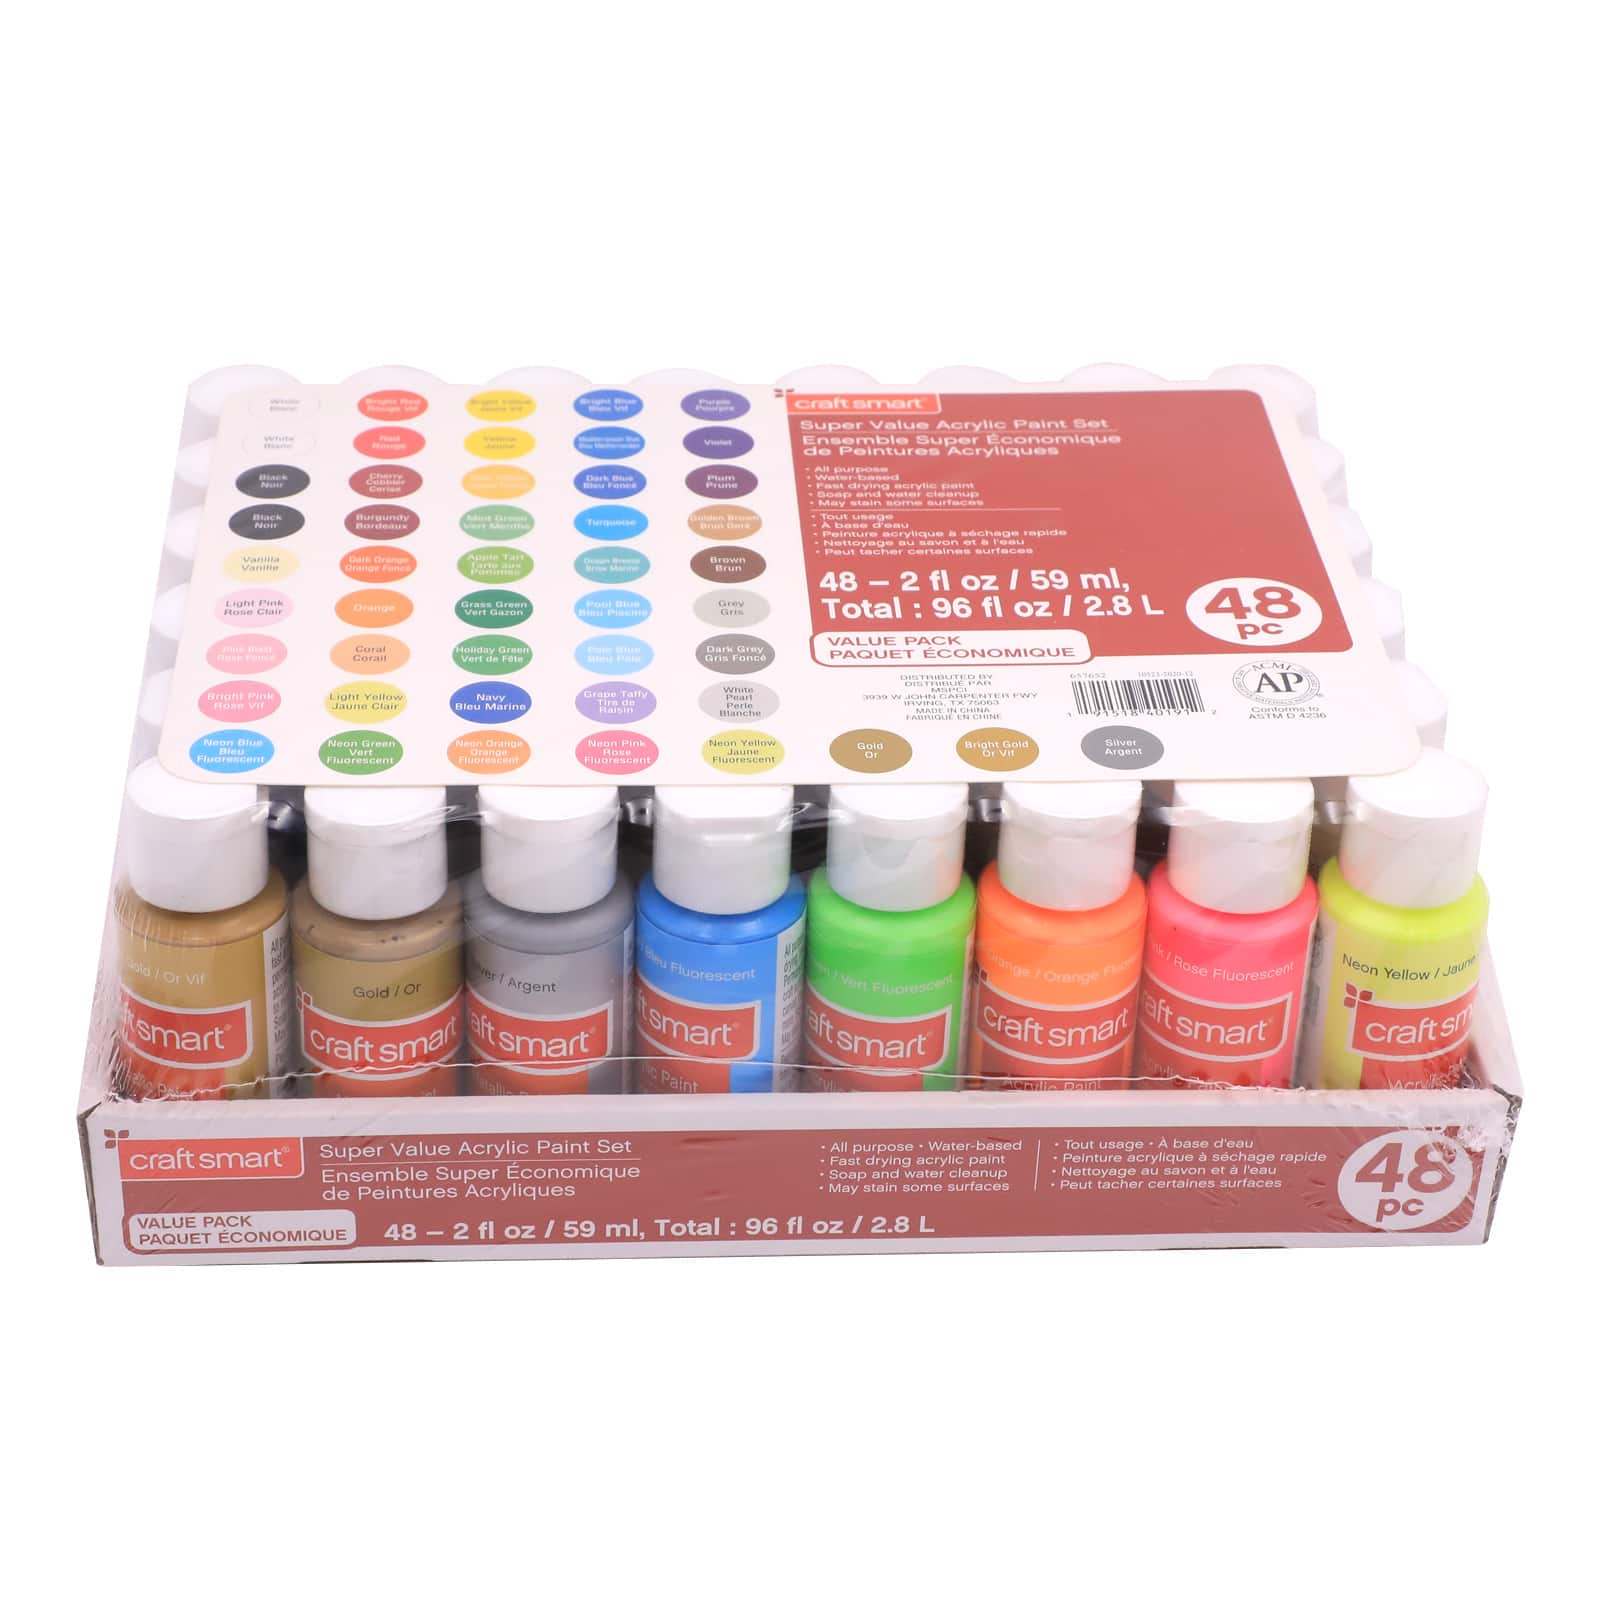 Super Value Acrylic Paint Set by Craft Smart&#xAE;